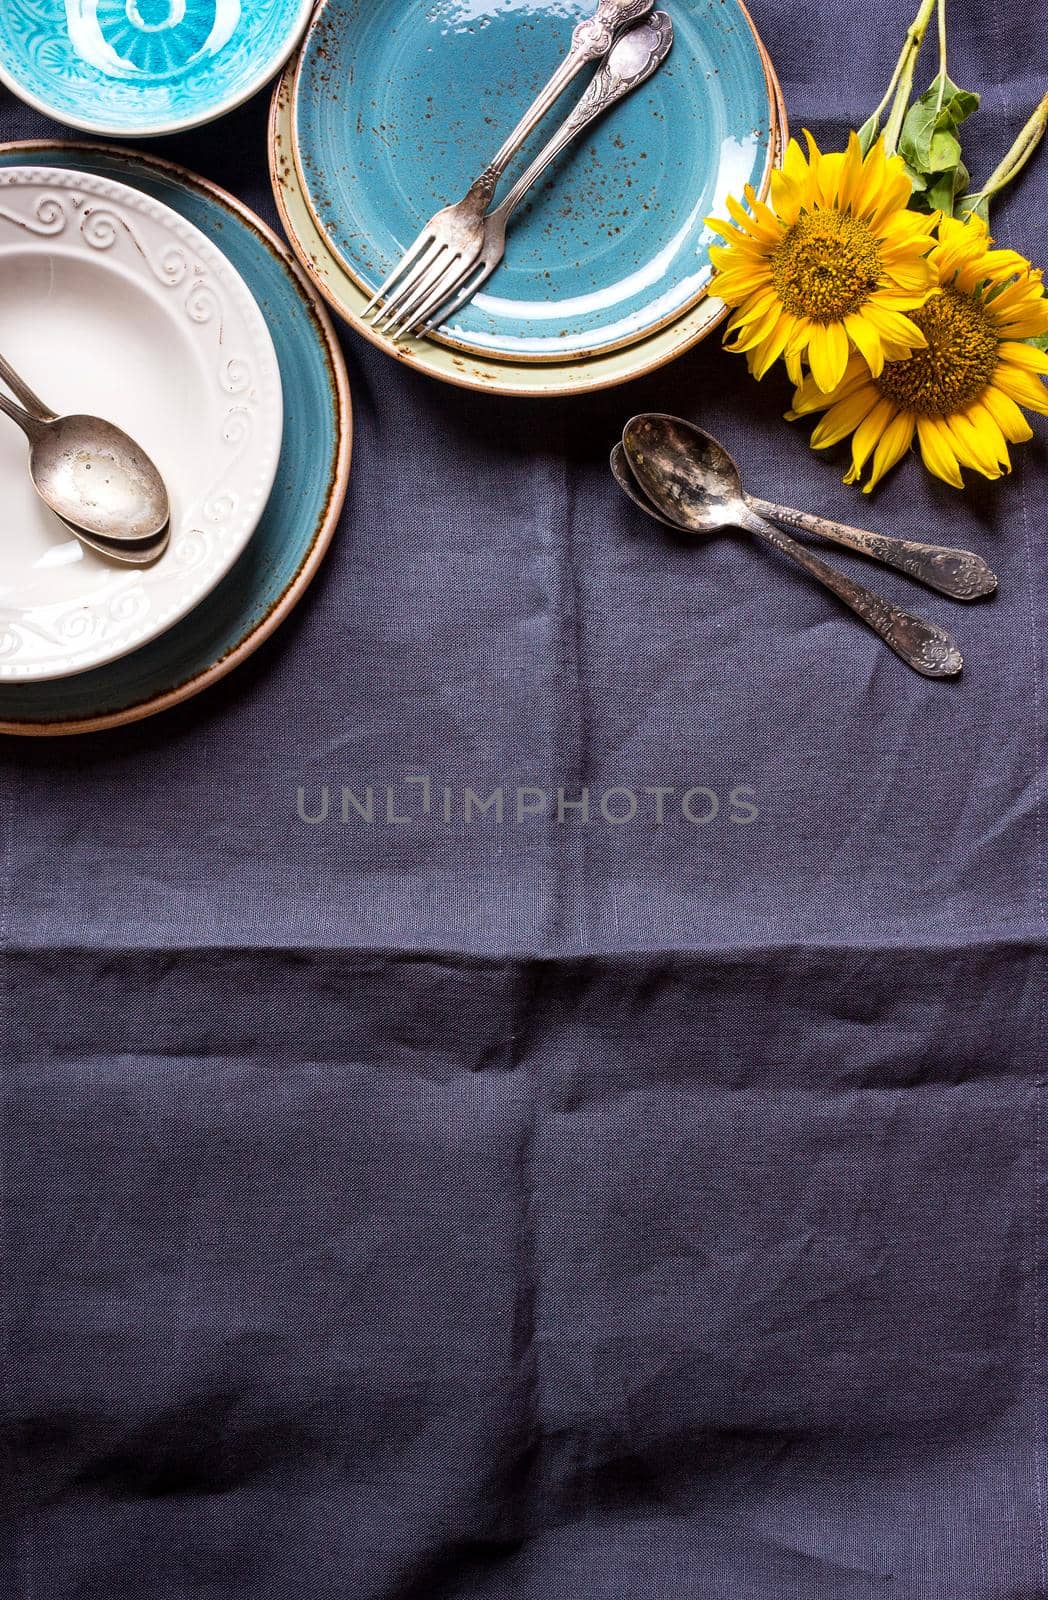 Vintage multicolored empty plates and bowls on a dark gray linen tablecloth with sunflower. With antique spoons and forks. Space for text. Table setting. Shabby chic/retro style. Top view. Copy space